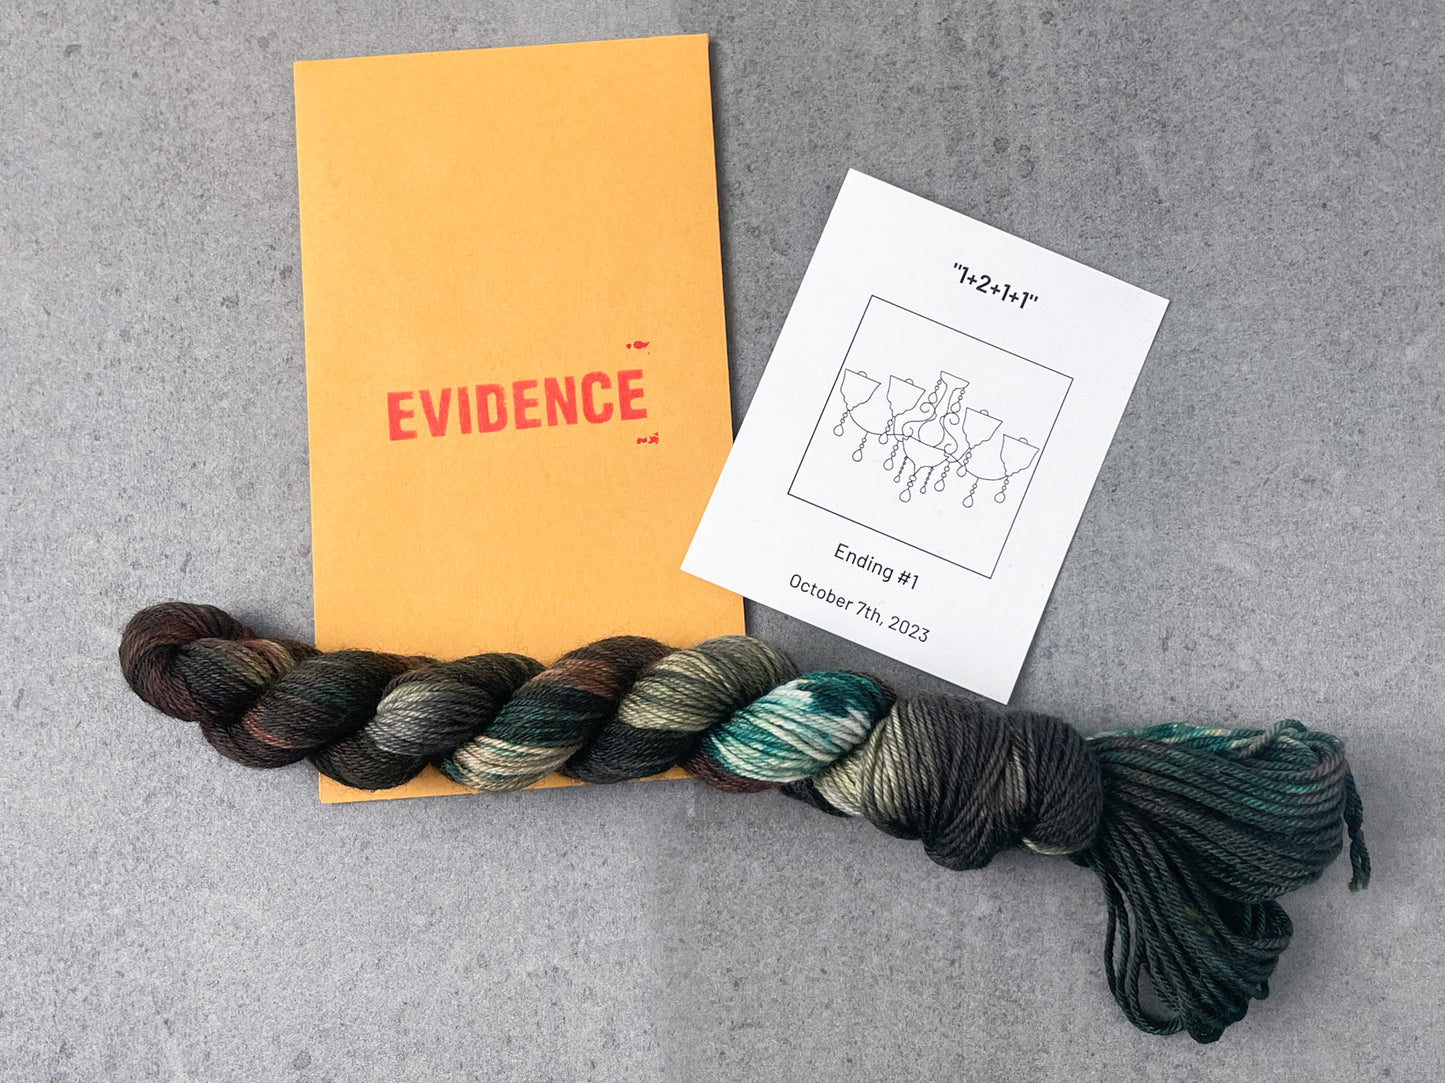 A skein of brown, green, and tan yarn on top of an envelope stamped with "Evidence" and a card with a drawing of a chandelier on it.